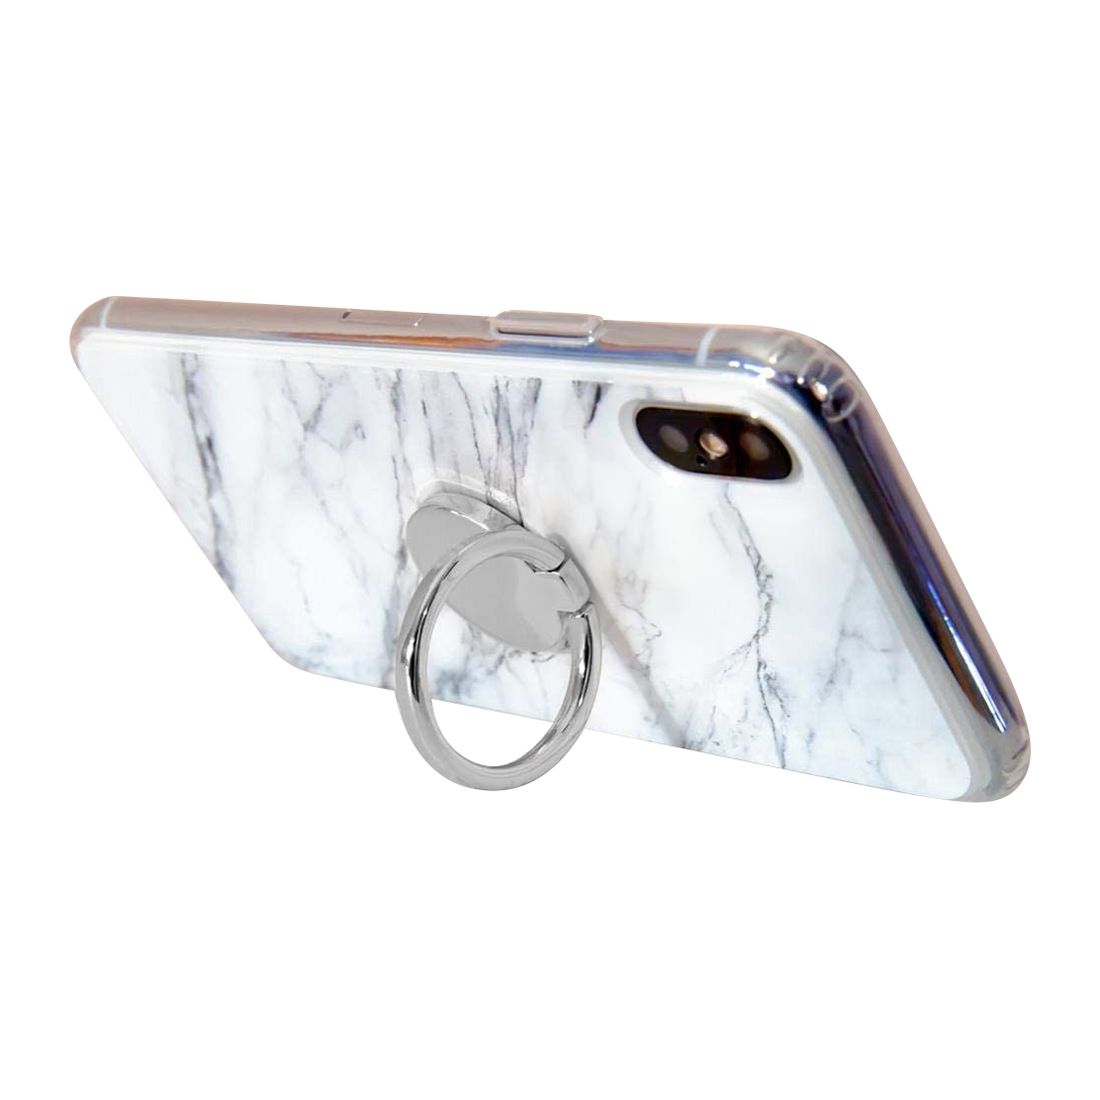 Casery Silver Mobile Phone Ring/Stand